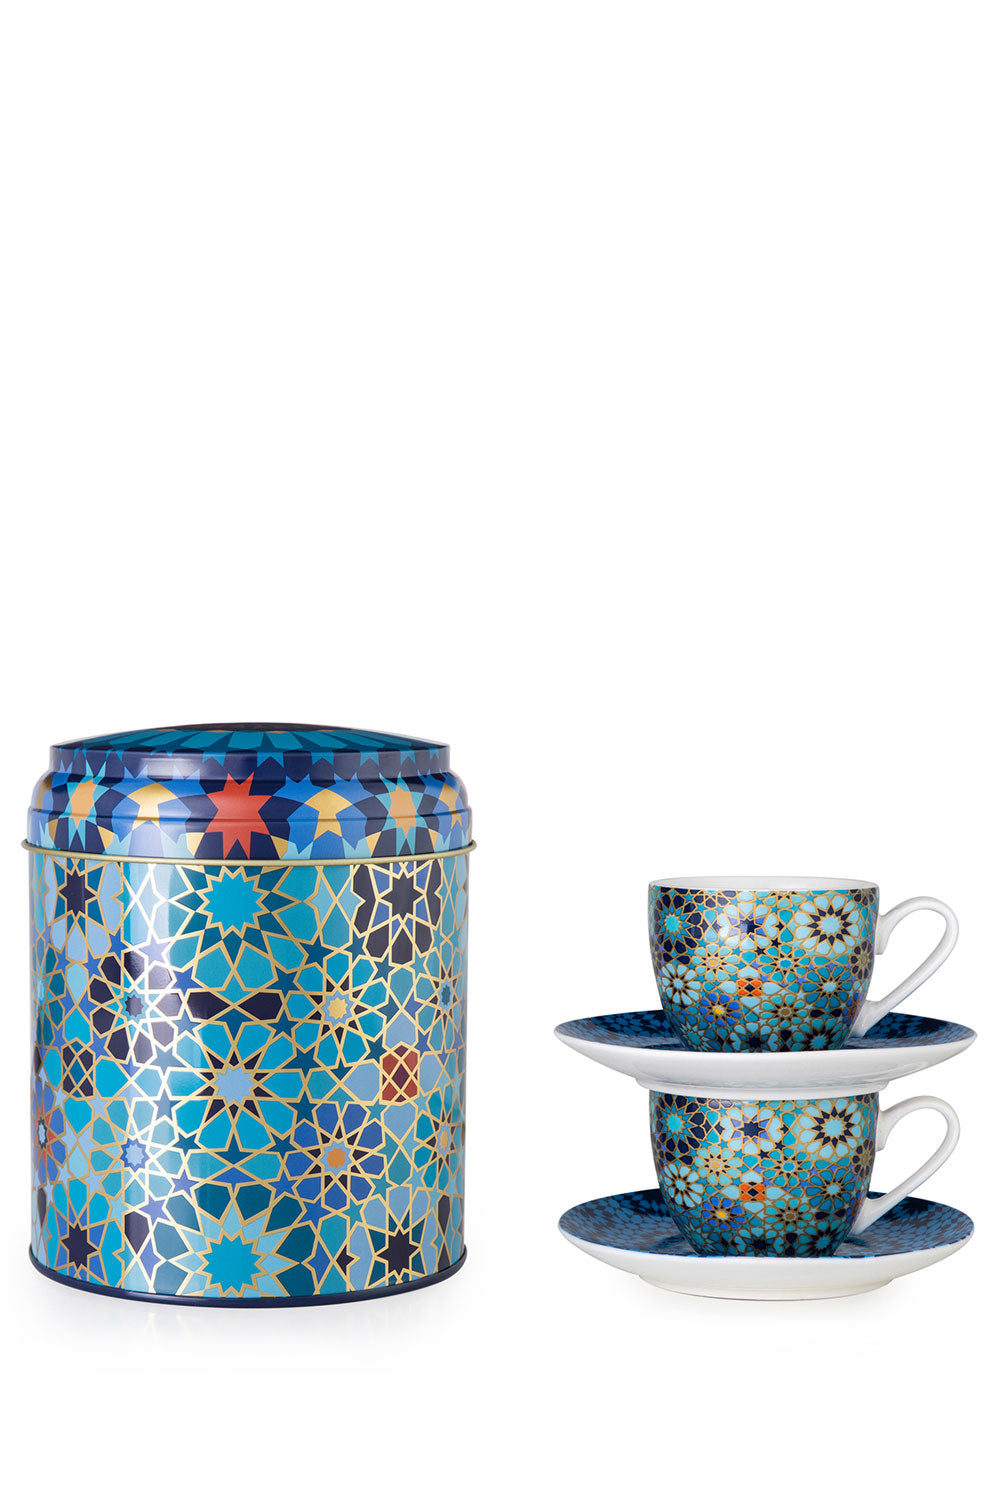 Moucharabieh Tin box with 2 cups and Saucer - Maison7